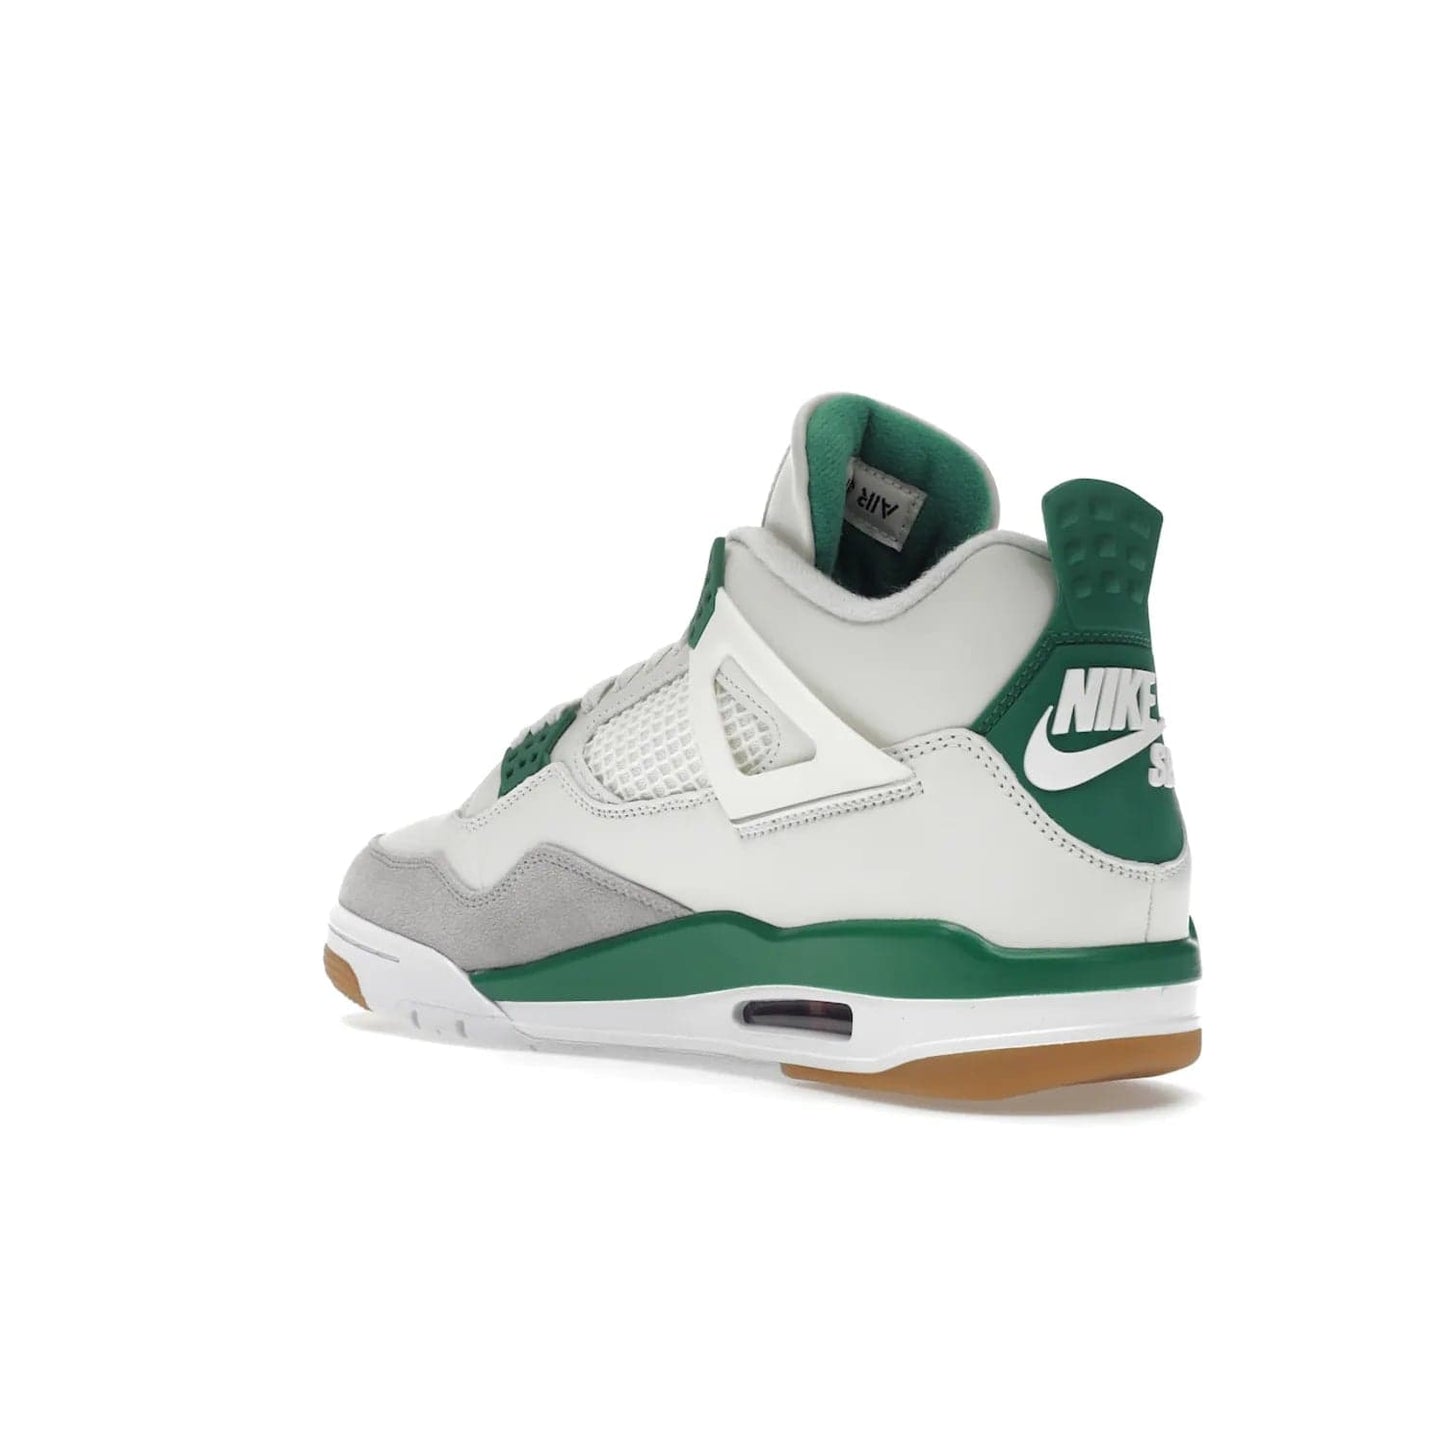 Jordan 4 Retro SB Pine Green - Image 24 - Only at www.BallersClubKickz.com - A white leather upper combined with a Neutral Grey suede mudguard gives this limited Air Jordan 4 Retro SB Pine Green sneaker its unmistakable style. Released March 20, 2023, the Jordan 4 Retro SB features a white and Pine Green midsole plus a red air unit with a gum outsole for grip. The perfect blend of Nike SB skateboarding and Jordan 4 classic design.